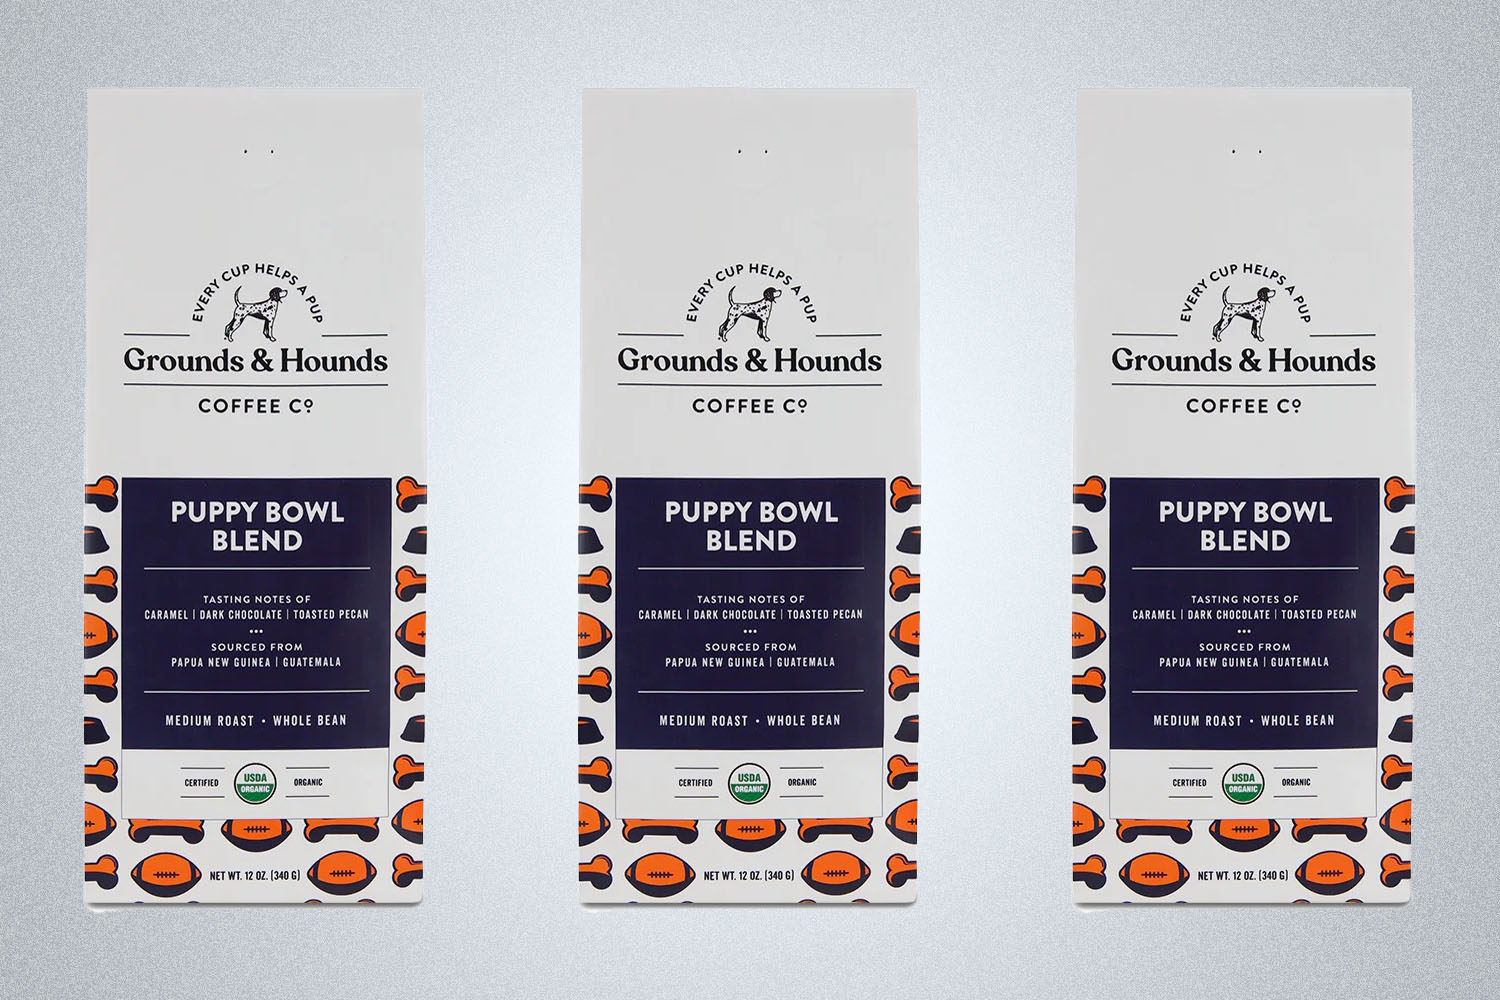 a bag of Grounds & Hounds Coffee Co. Puppy Bowl Blend on a grey background